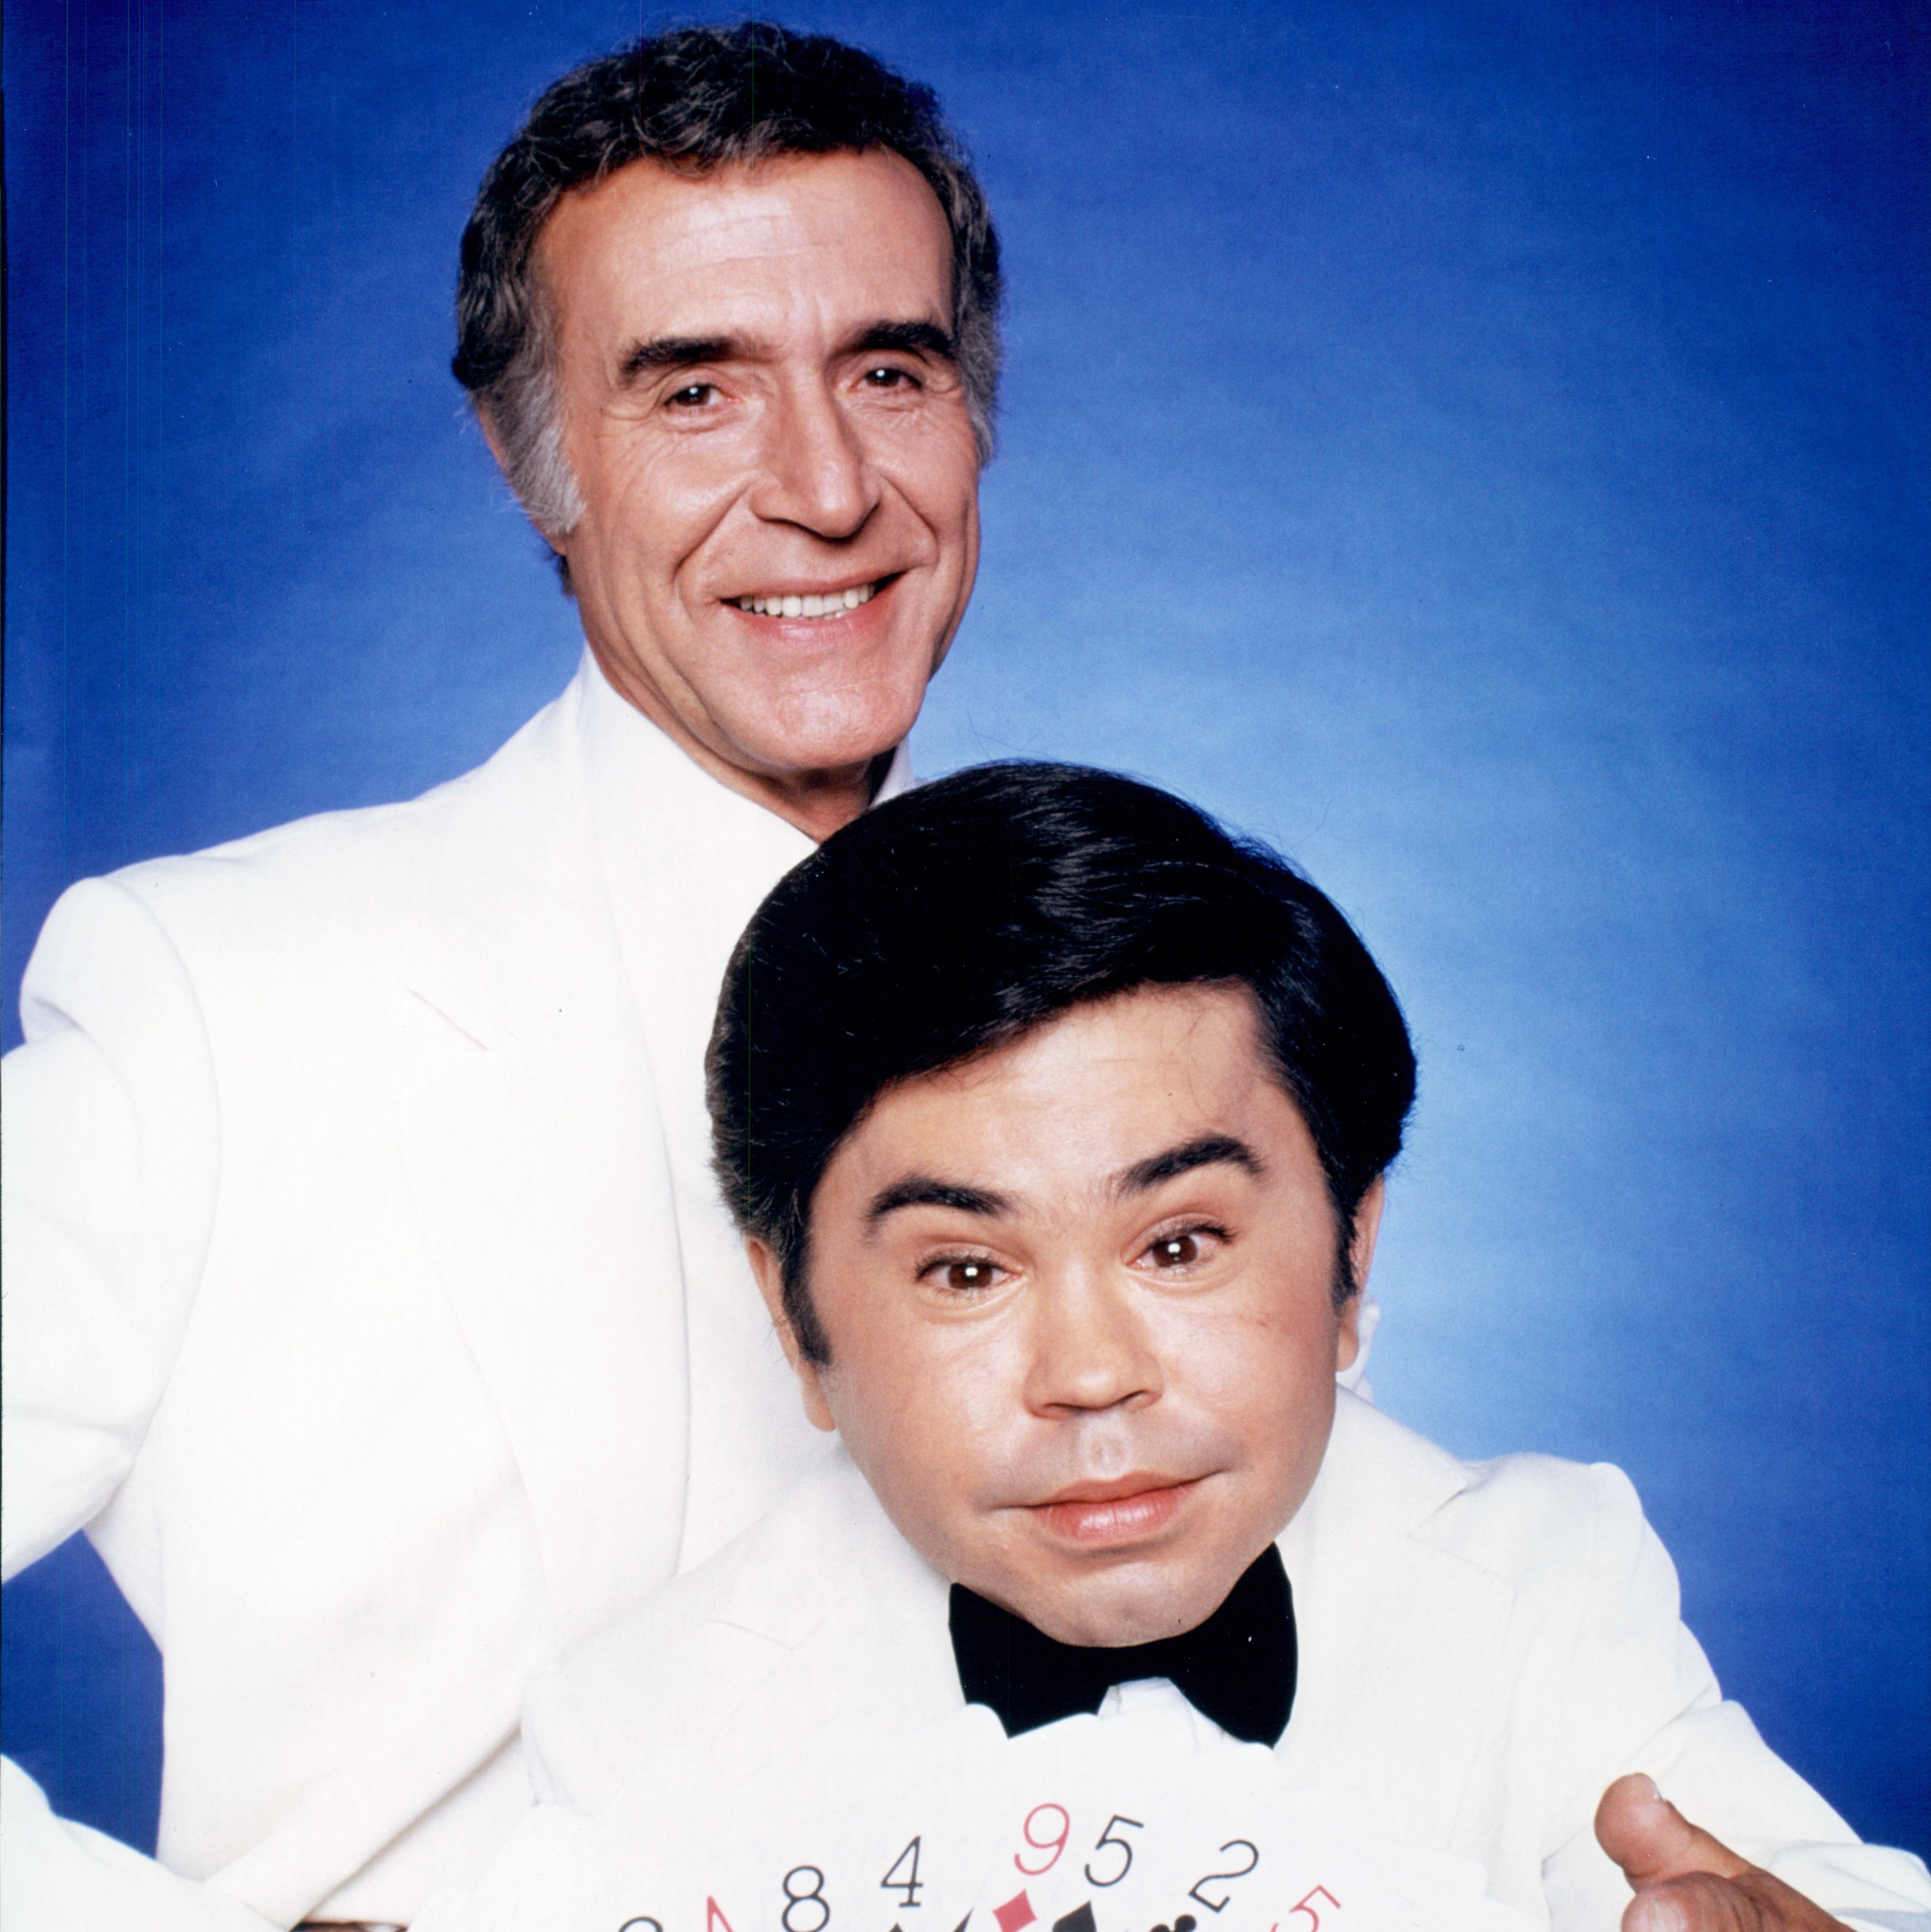 Ricardo Montalban and Herve Villechaize from Fantasy Island, 1980